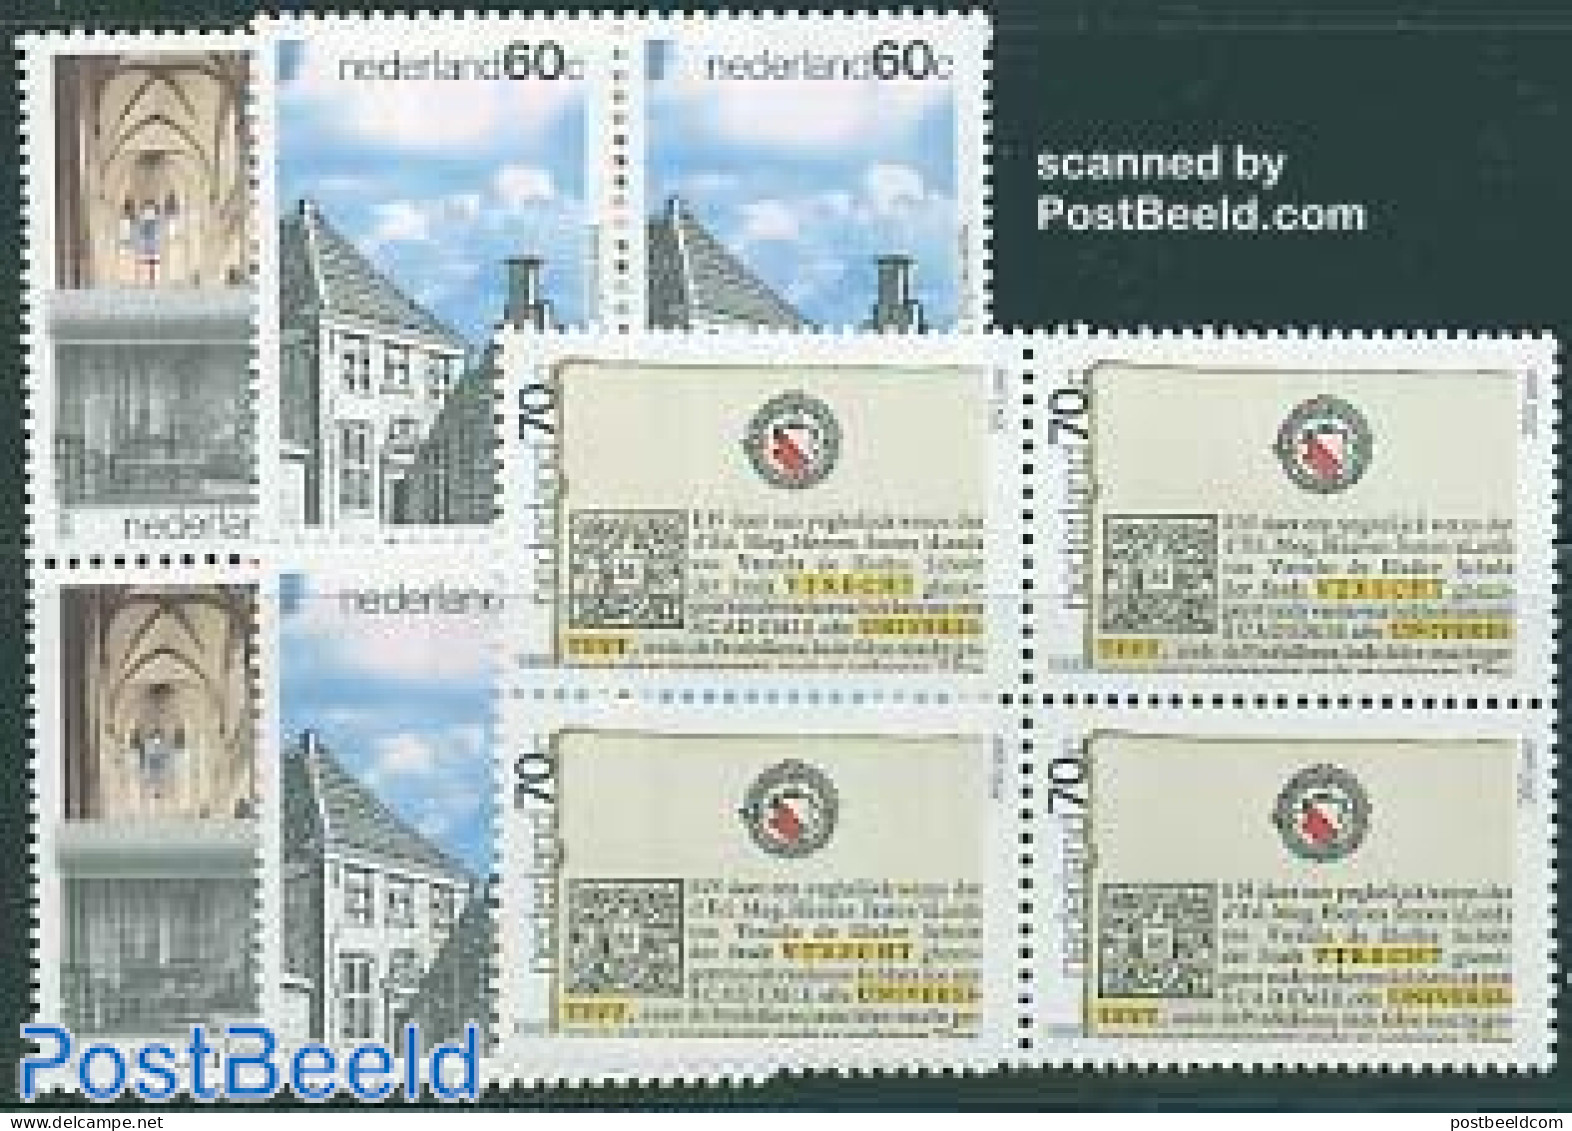 Netherlands 1986 Utrecht 3v Blocks Of 4 [+], Mint NH, Religion - Science - Churches, Temples, Mosques, Synagogues - Ed.. - Unused Stamps